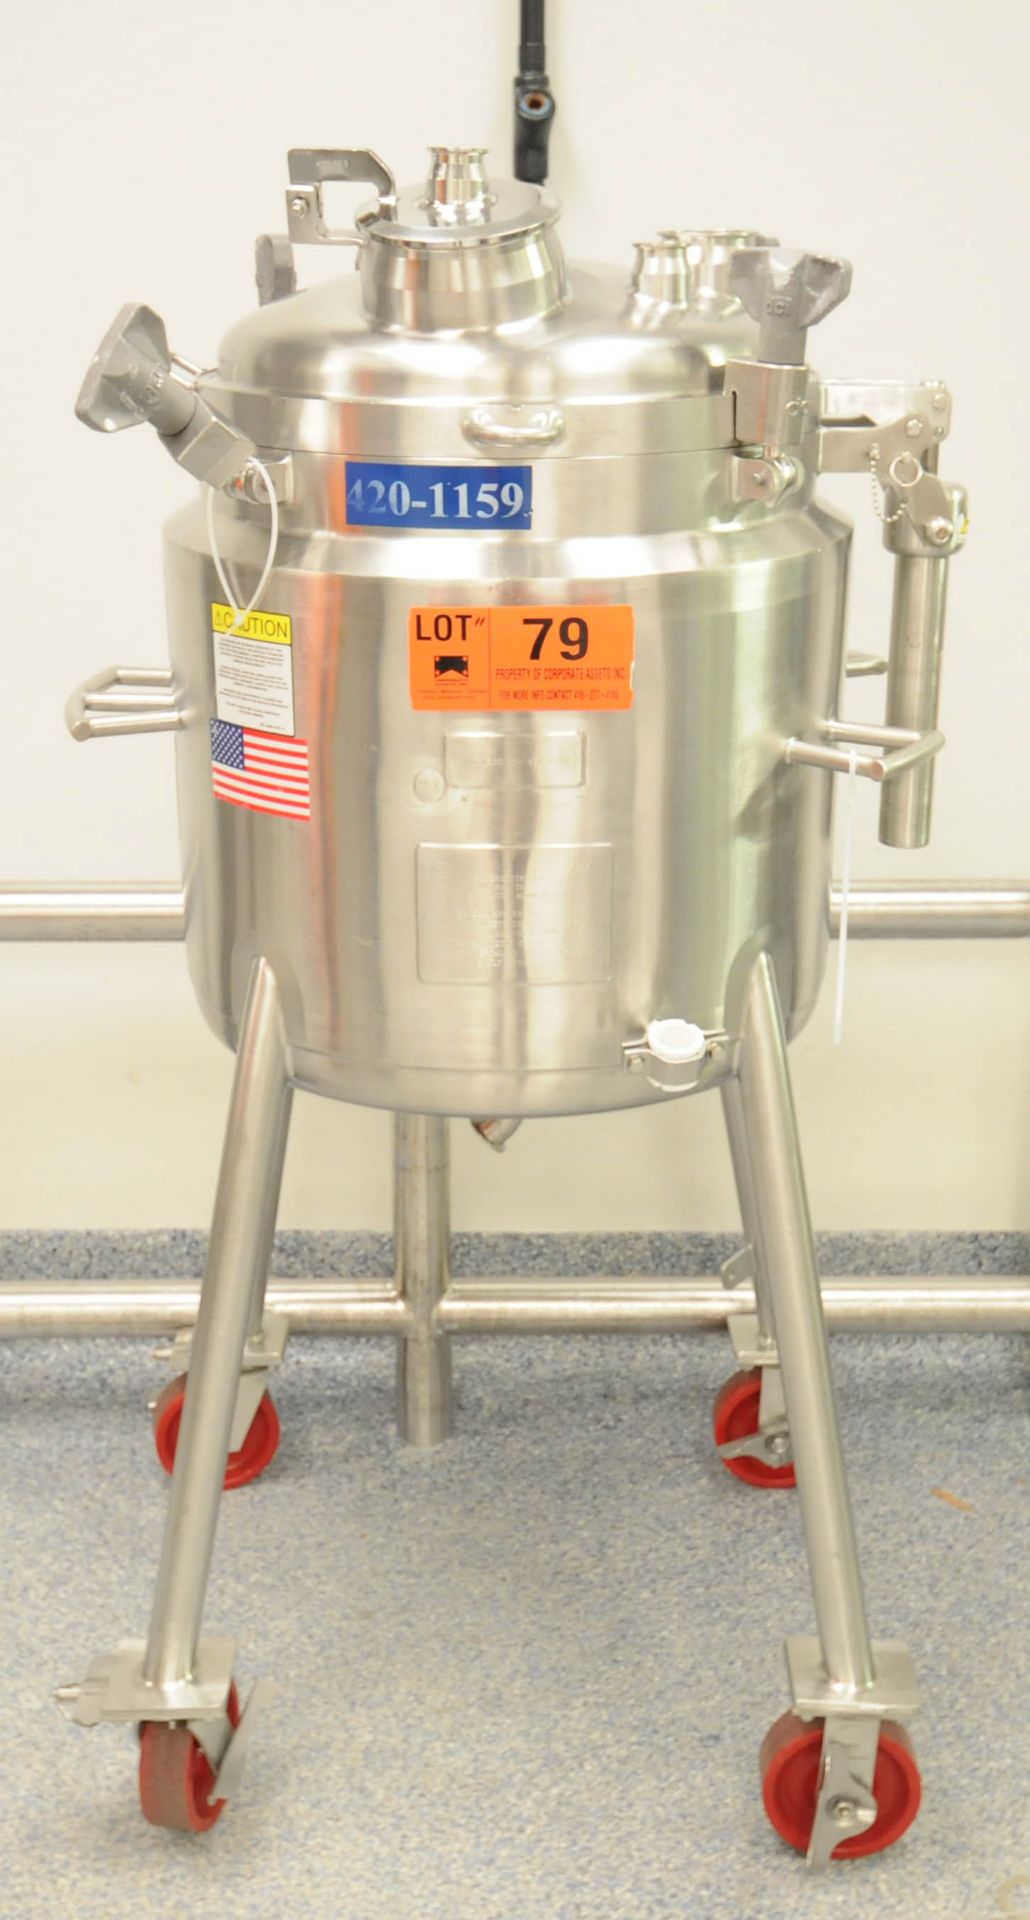 DCI (2009) PORTABLE STAINLESS STEEL TANK WITH 100 LITER CAPACITY, 45 PSIG MAWP @ 346 DEG F, 23"